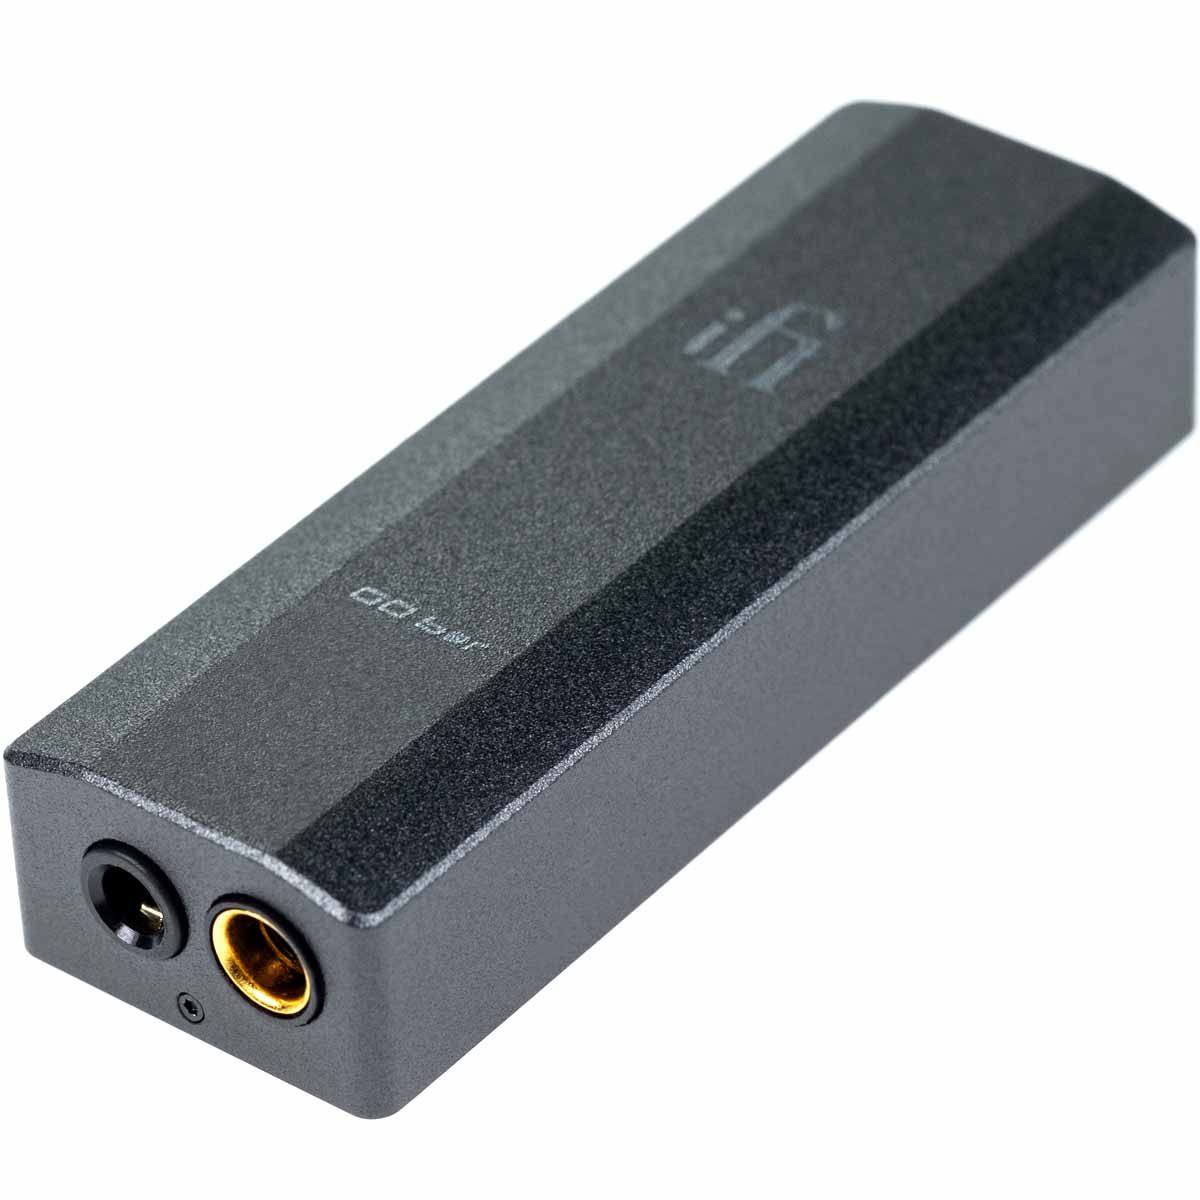 iFi GO Bar Portable Headphone Amp & DAC - angled front view